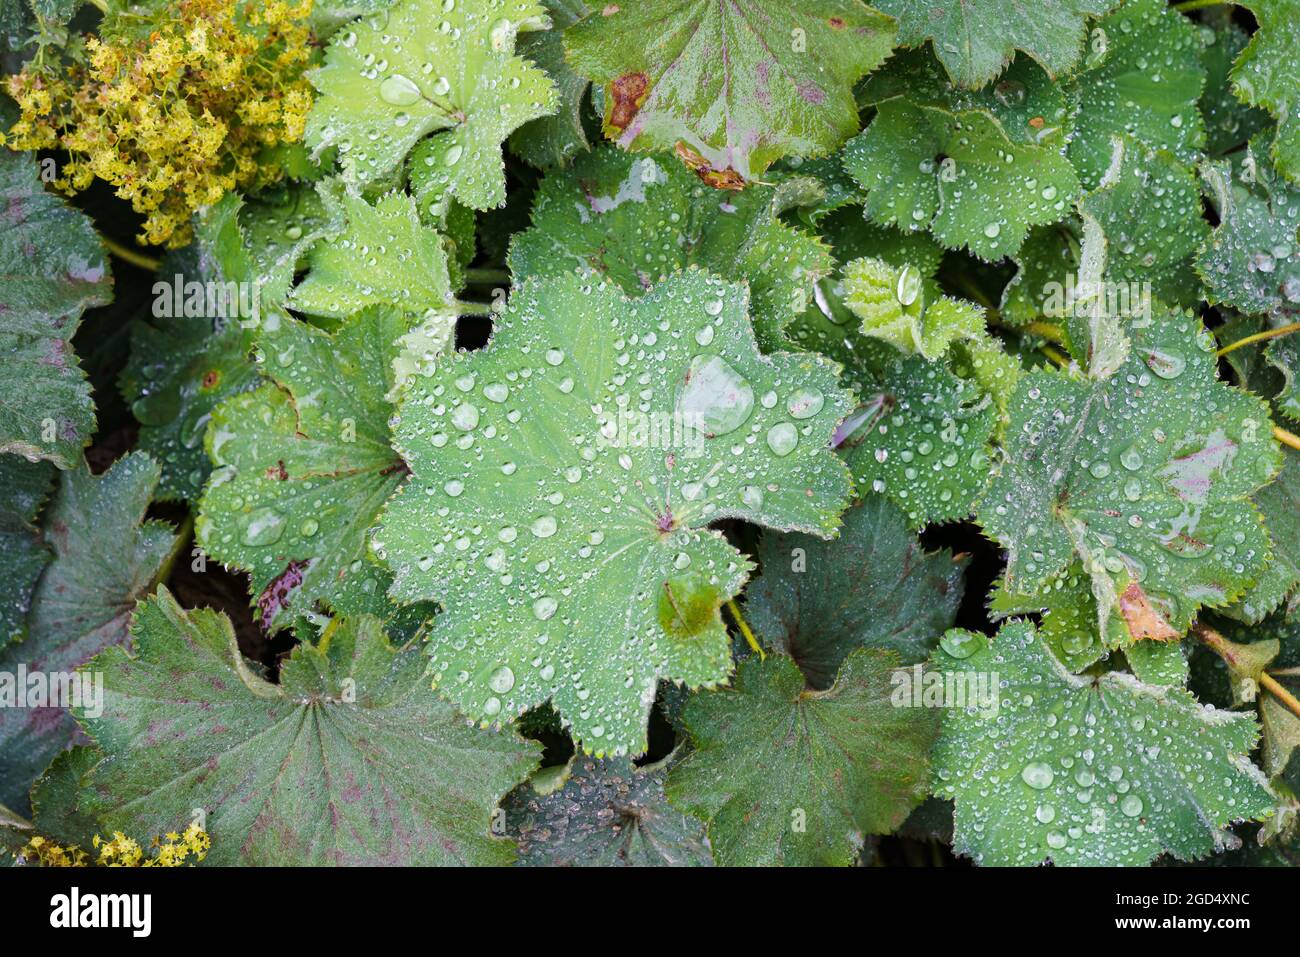 Closeup of Mantle flowers (Alchemilla propinqua) in water drops after rain. Lady's-mantle - perennial garden ornamental plant. Selective focus. Stock Photo